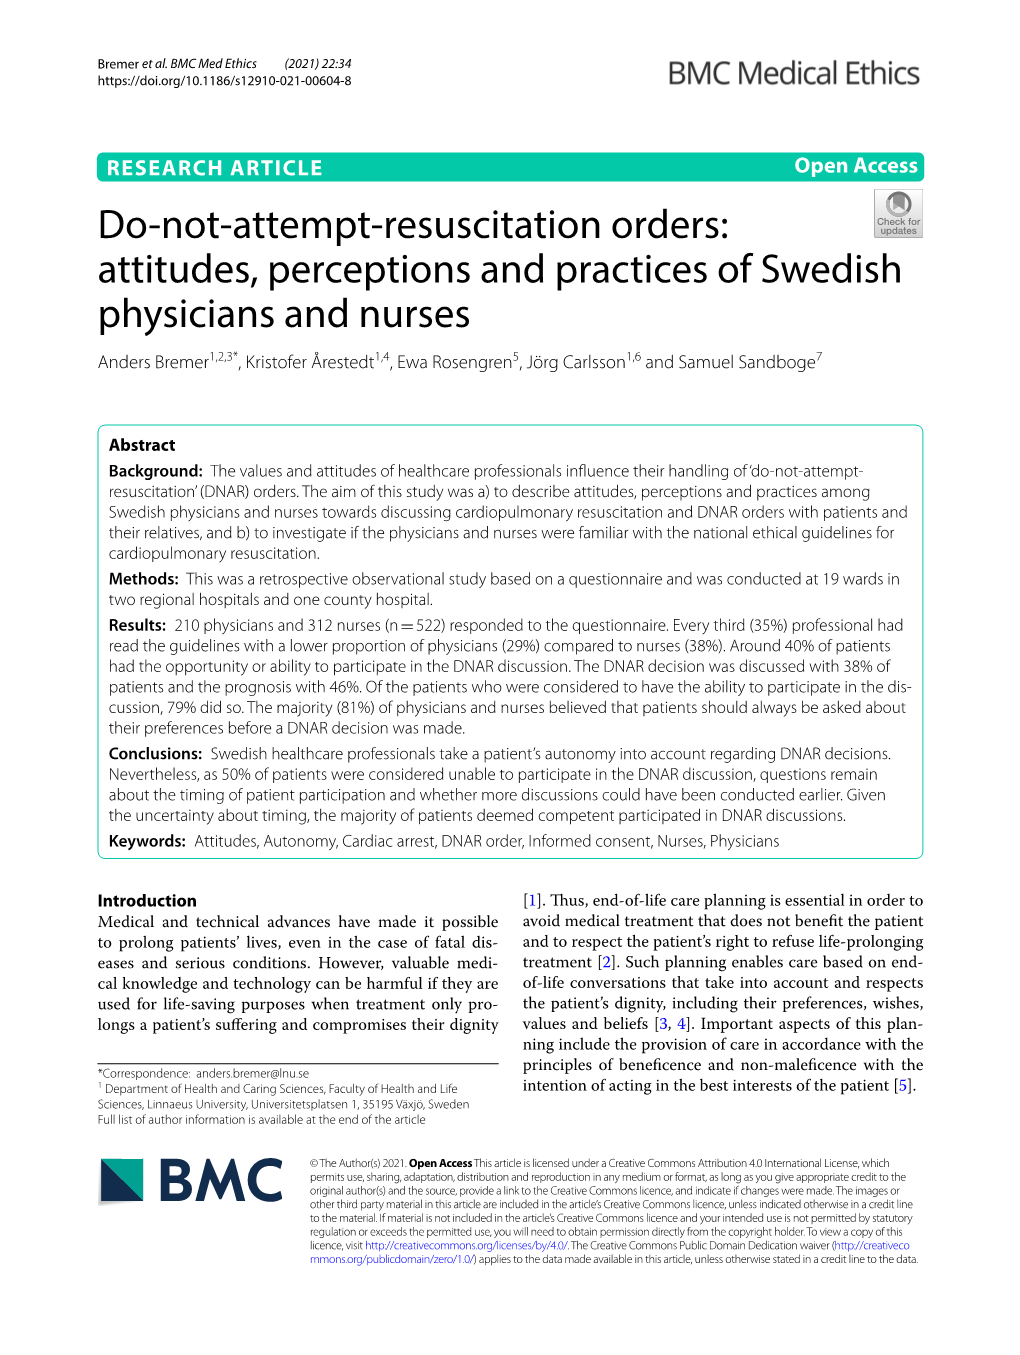 Attitudes, Perceptions and Practices of Swedish Physicians and Nurses